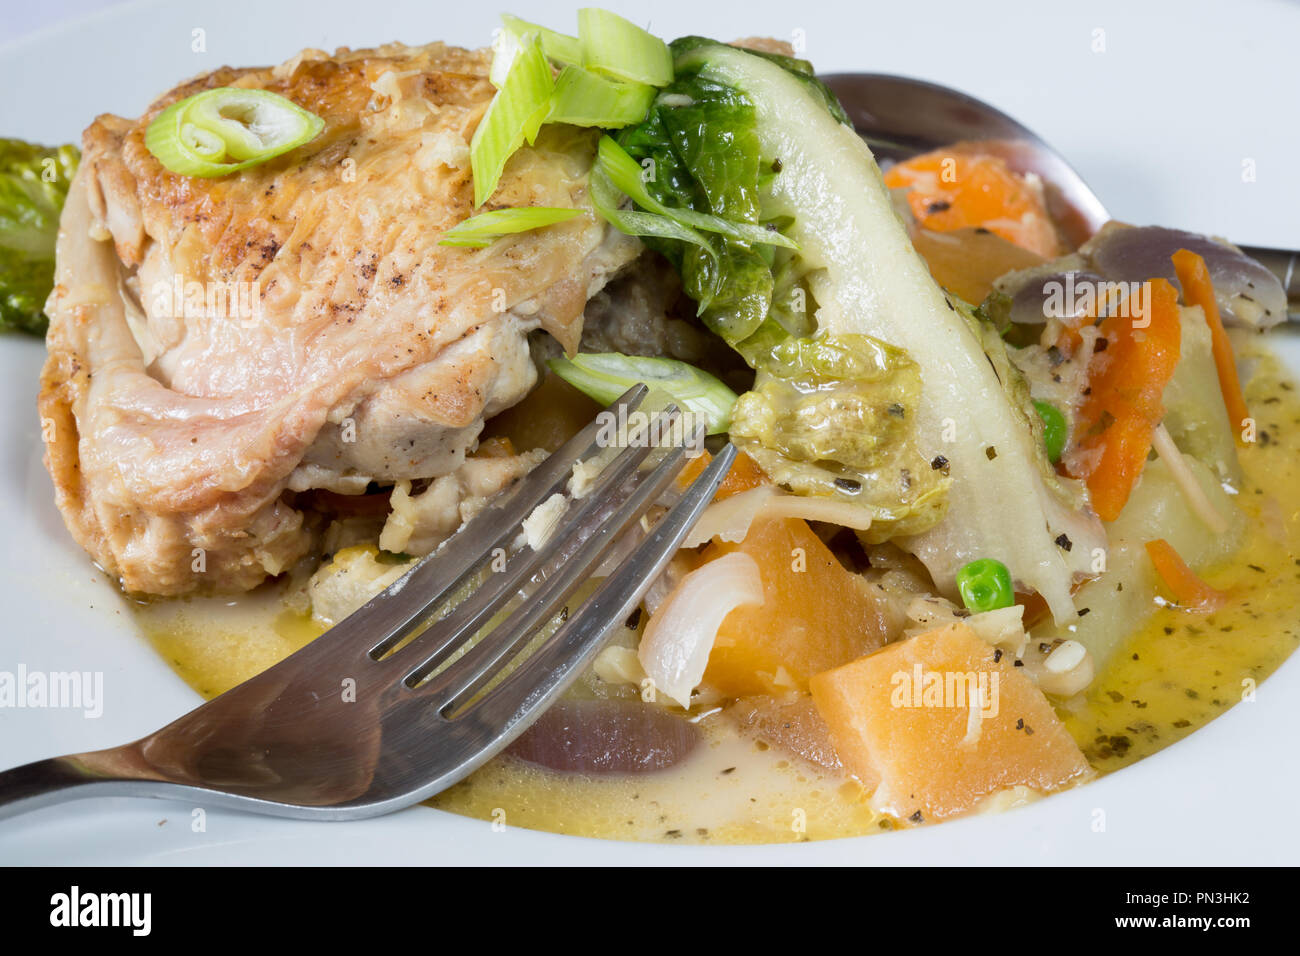 Braised Chicken and vegetable casserole. Stock Photo